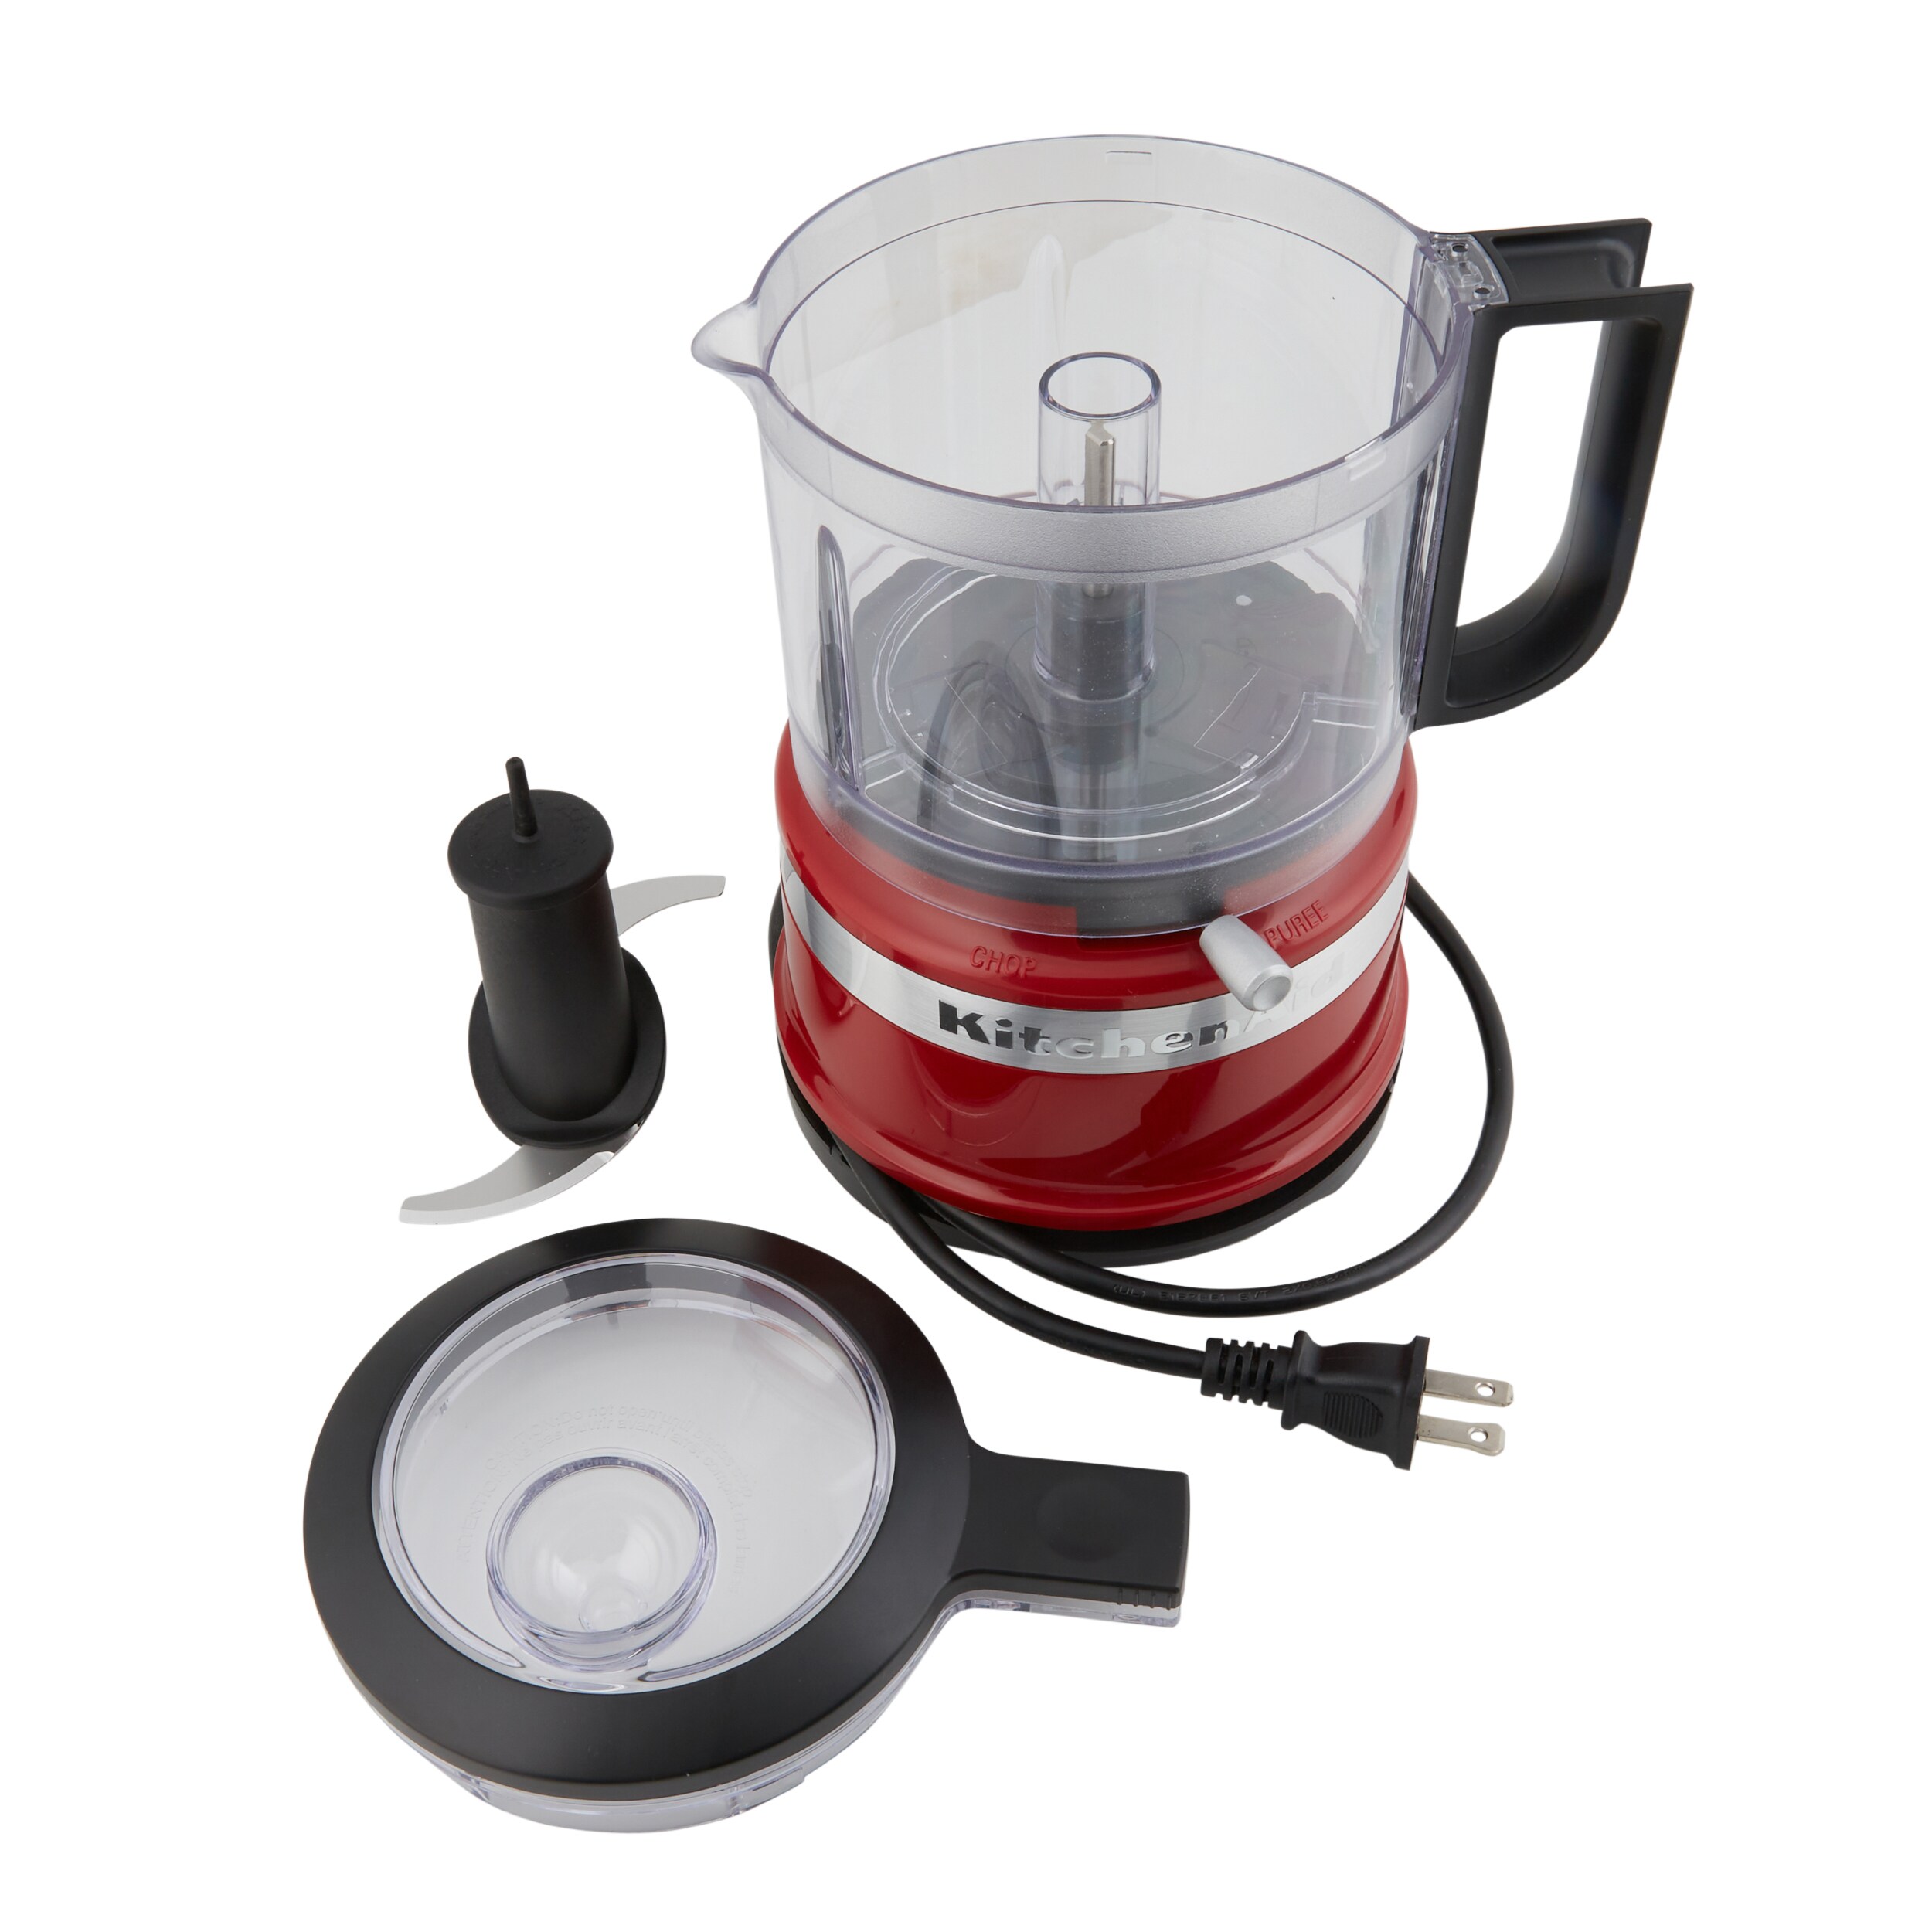 KitchenAid 9 Cup Food Processor in Empire Red